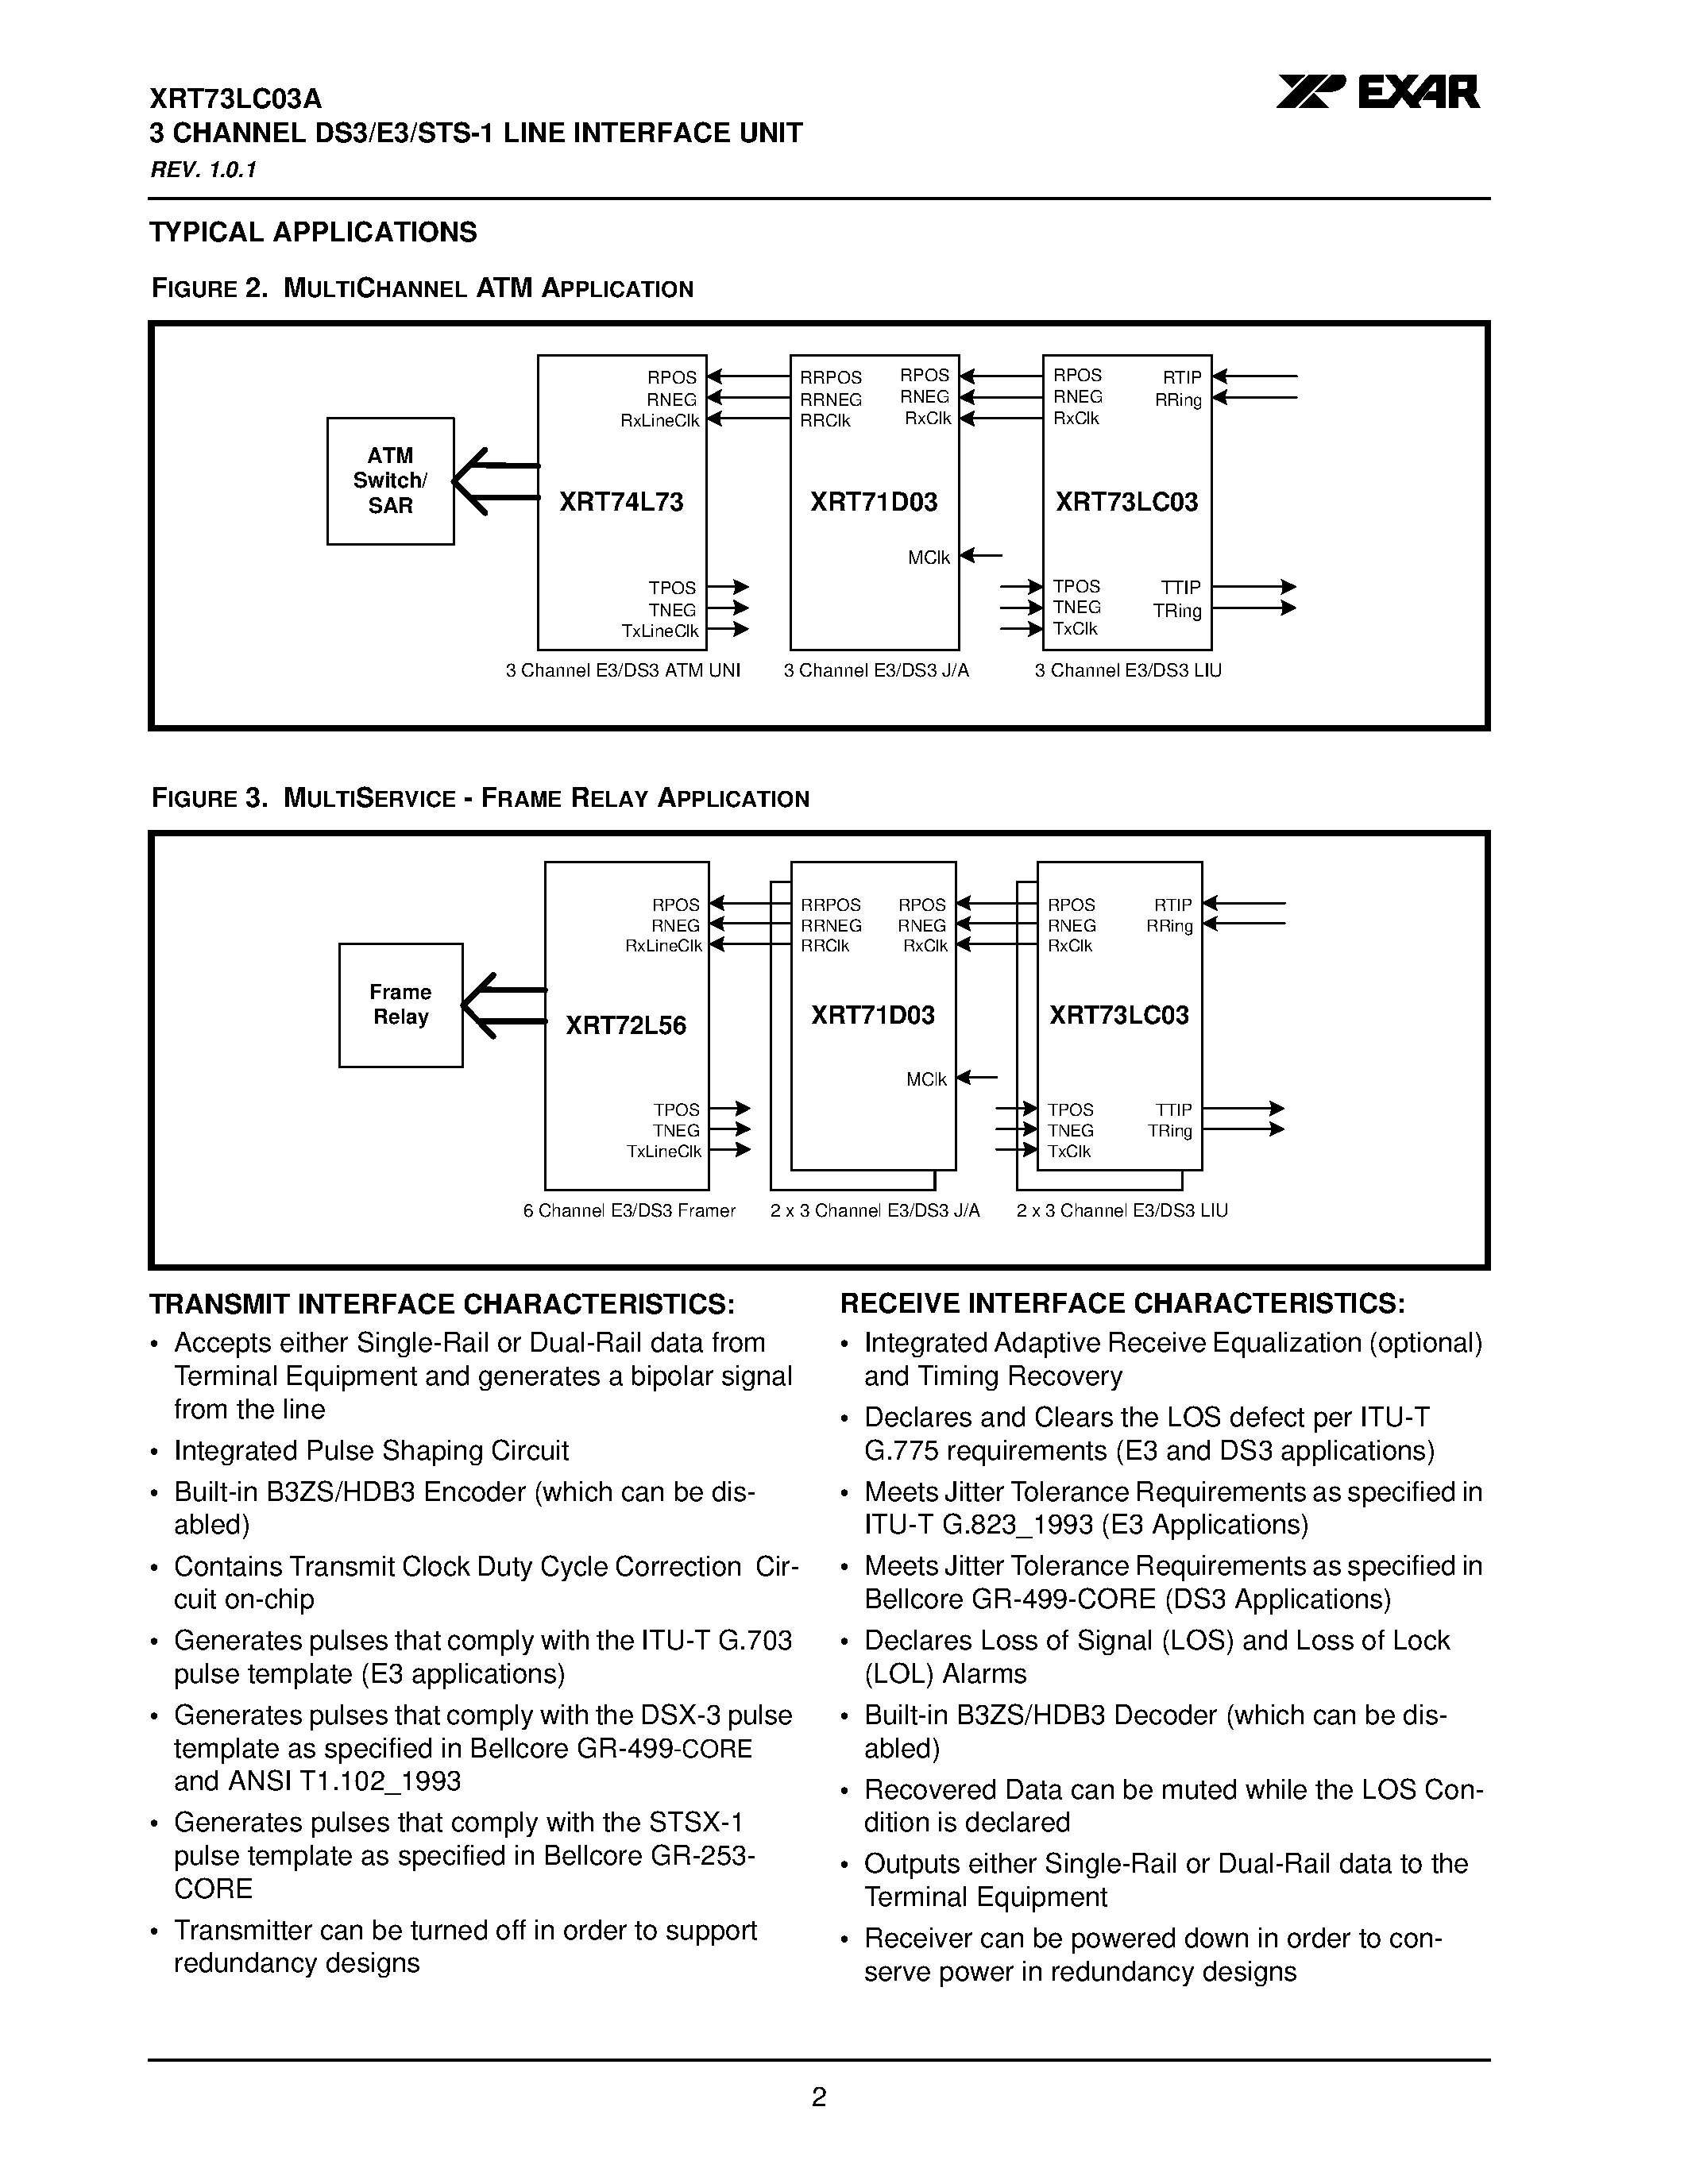 Datasheet XRT73LC03A - 3 CHANNEL DS3/E3/STS-1 LINE INTERFACE UNIT page 2